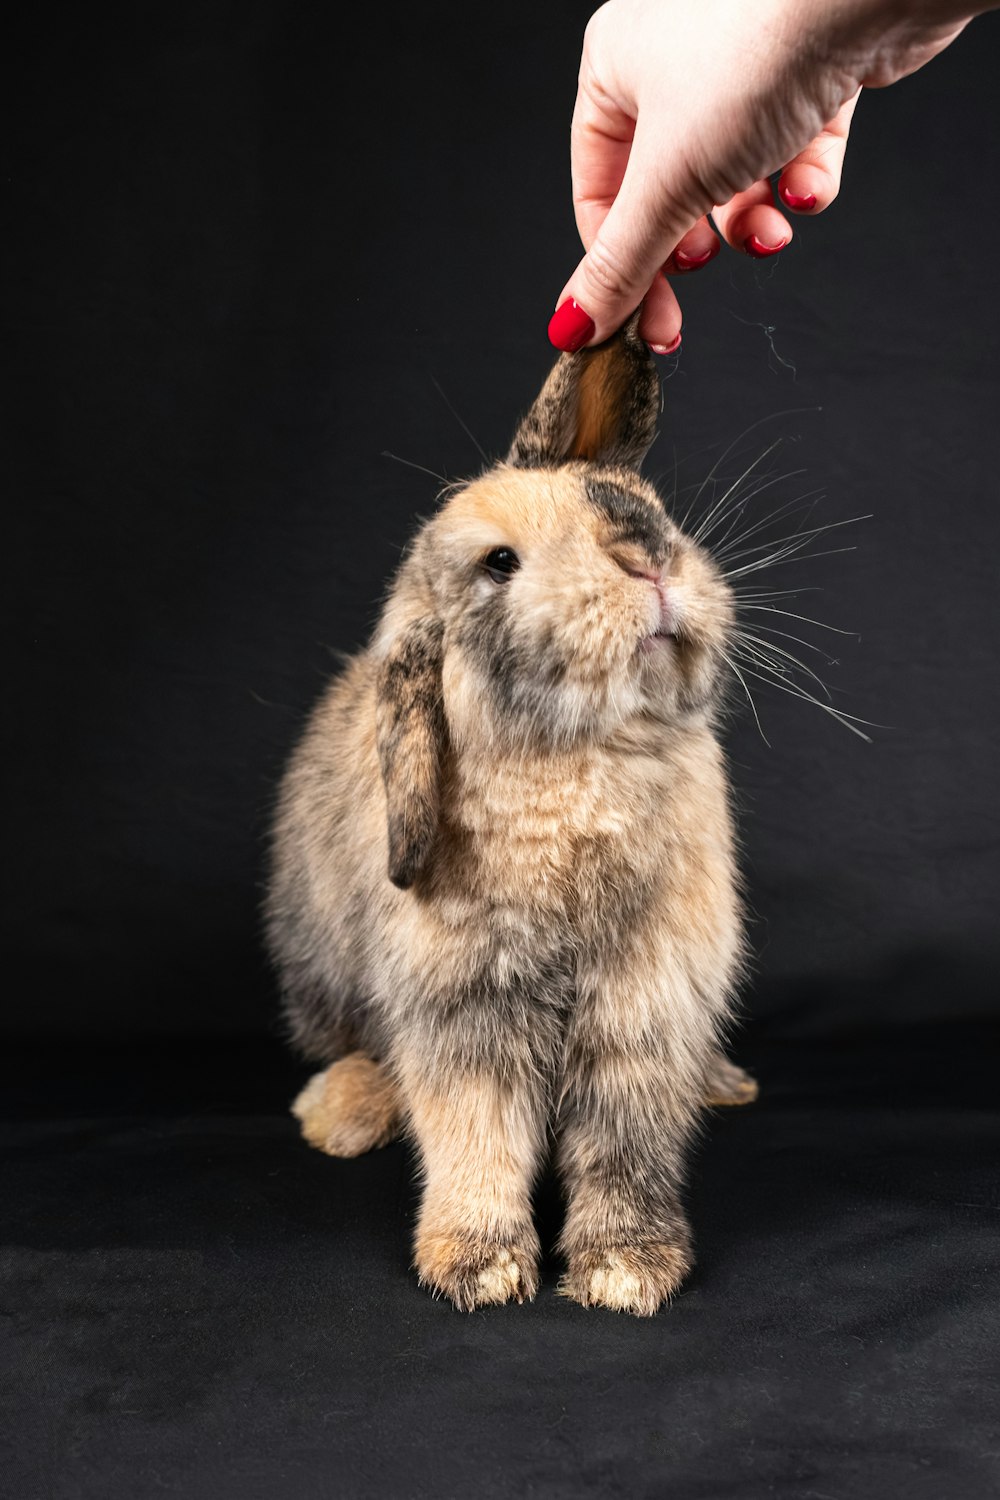 a person feeding a rabbit with a carrot